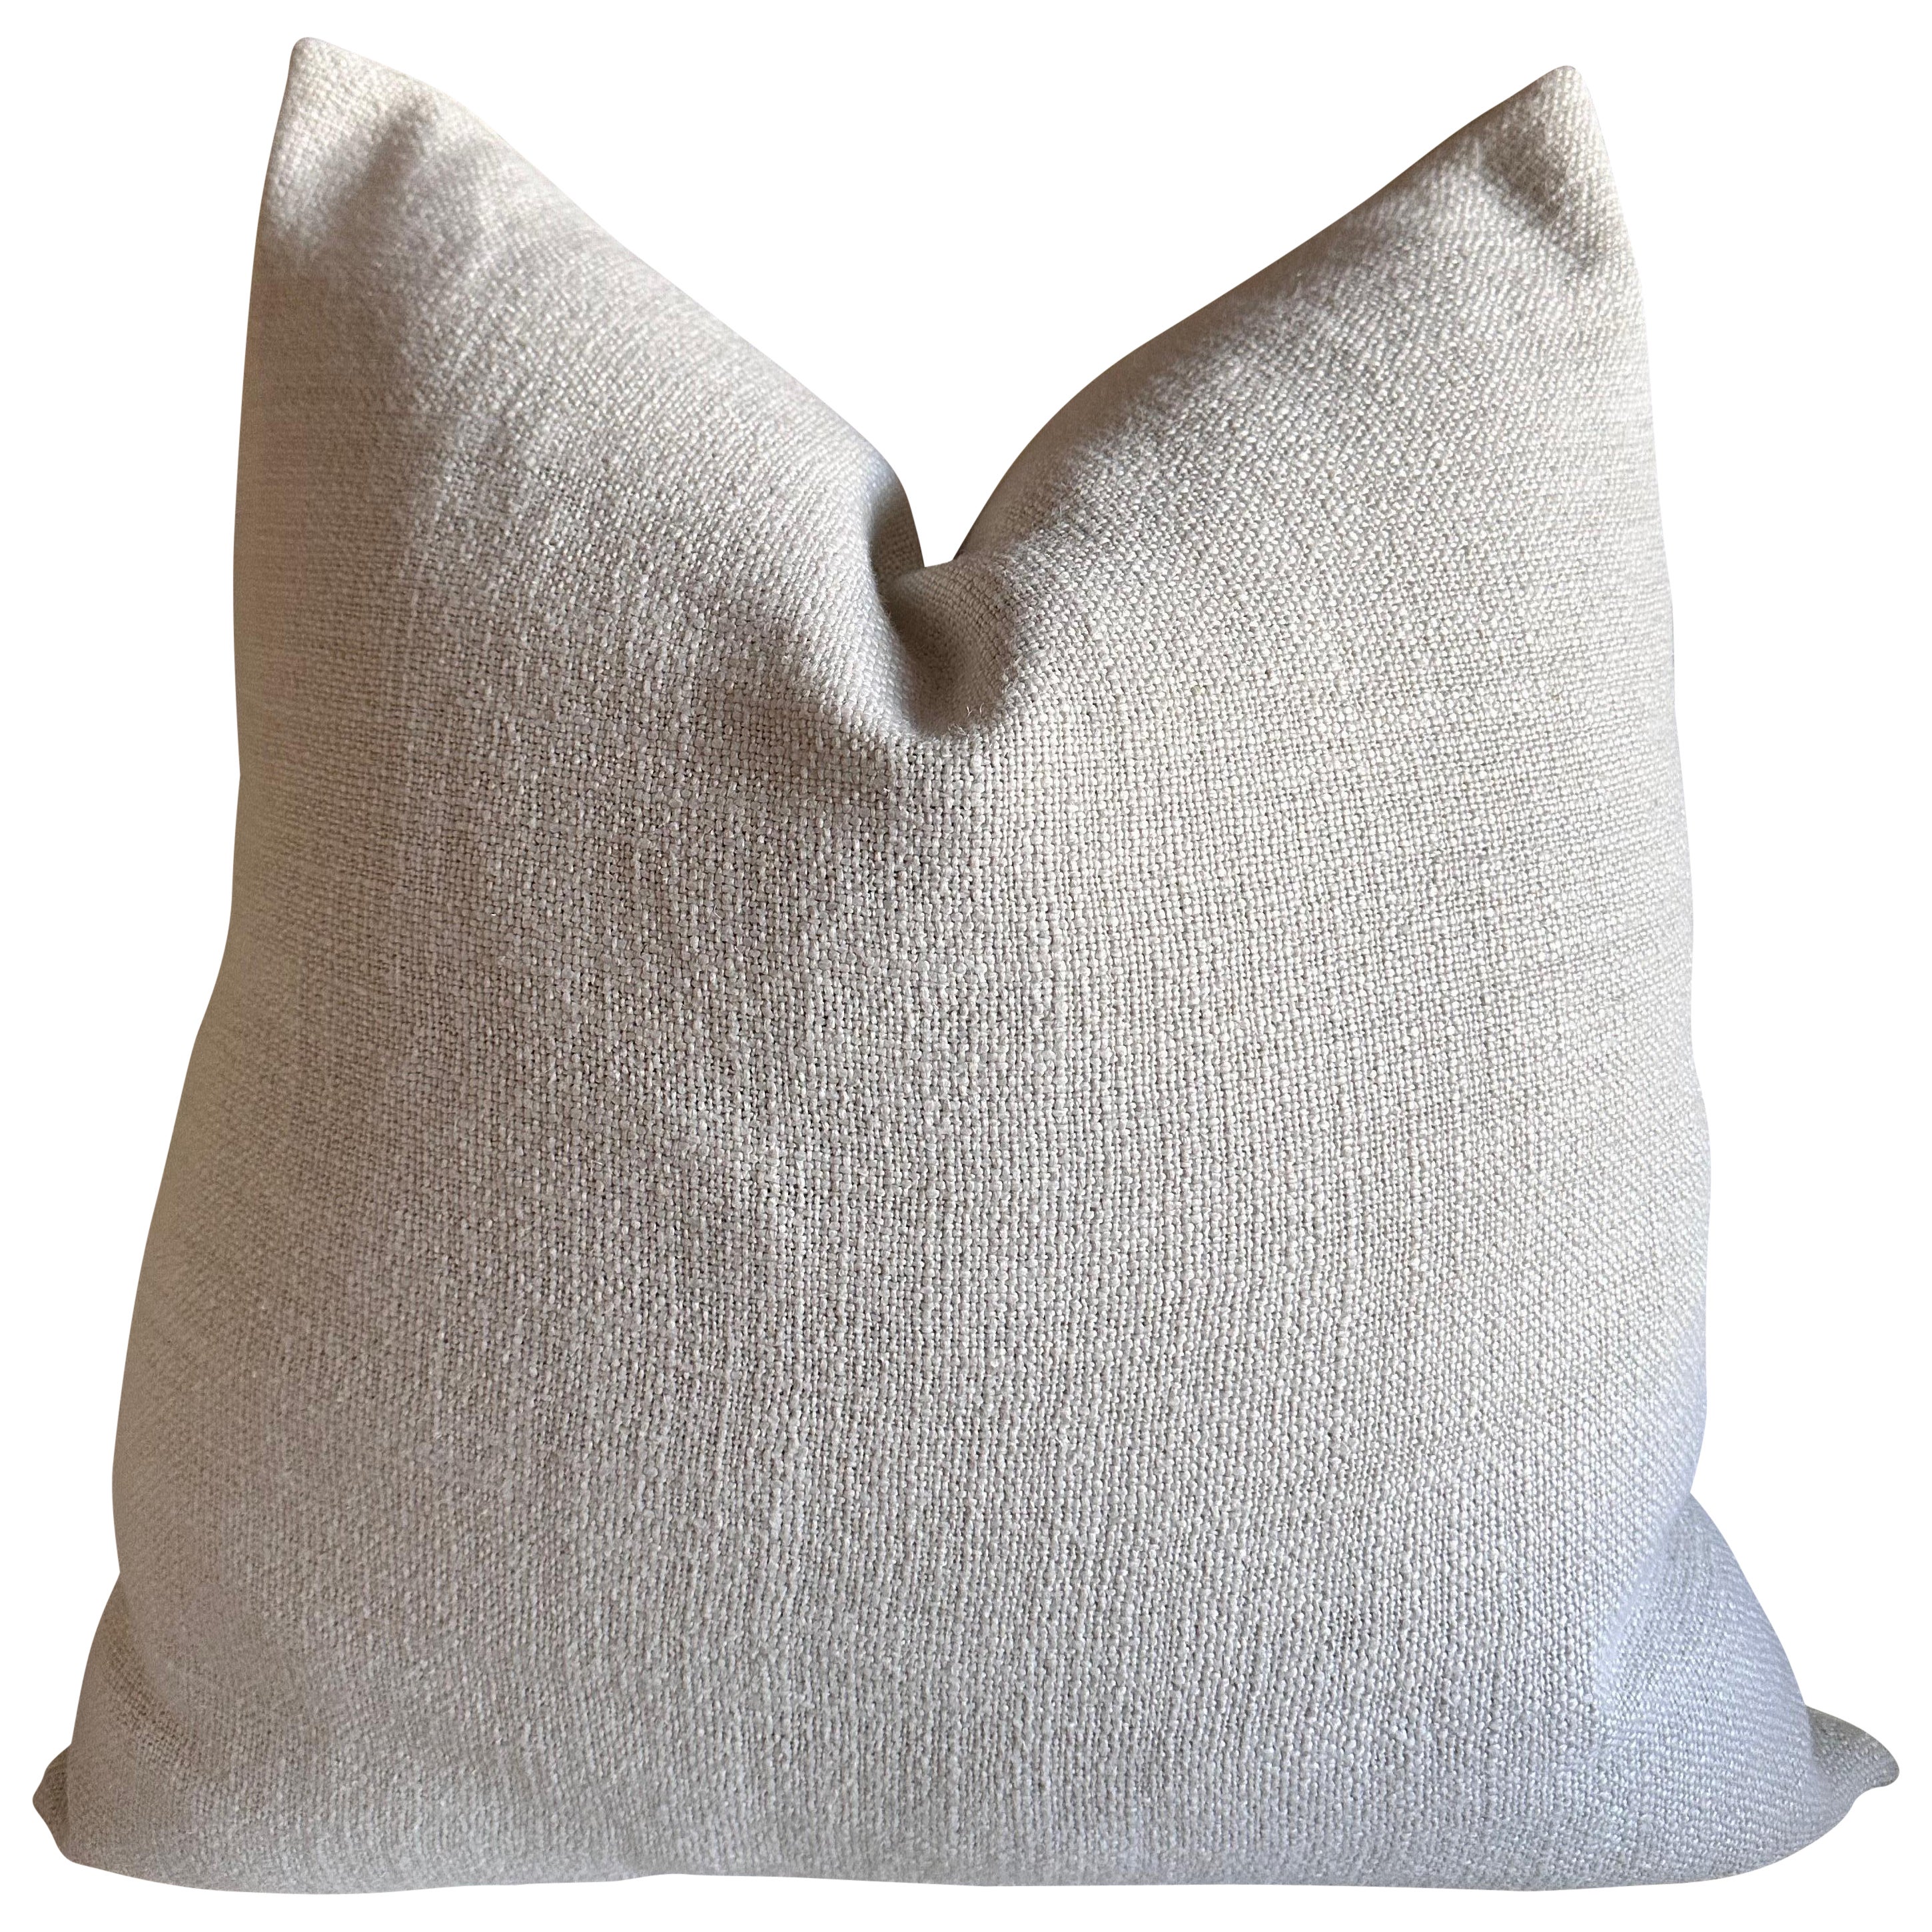 French Linen Textured Pillow in Blanc Oyster with Down Insert